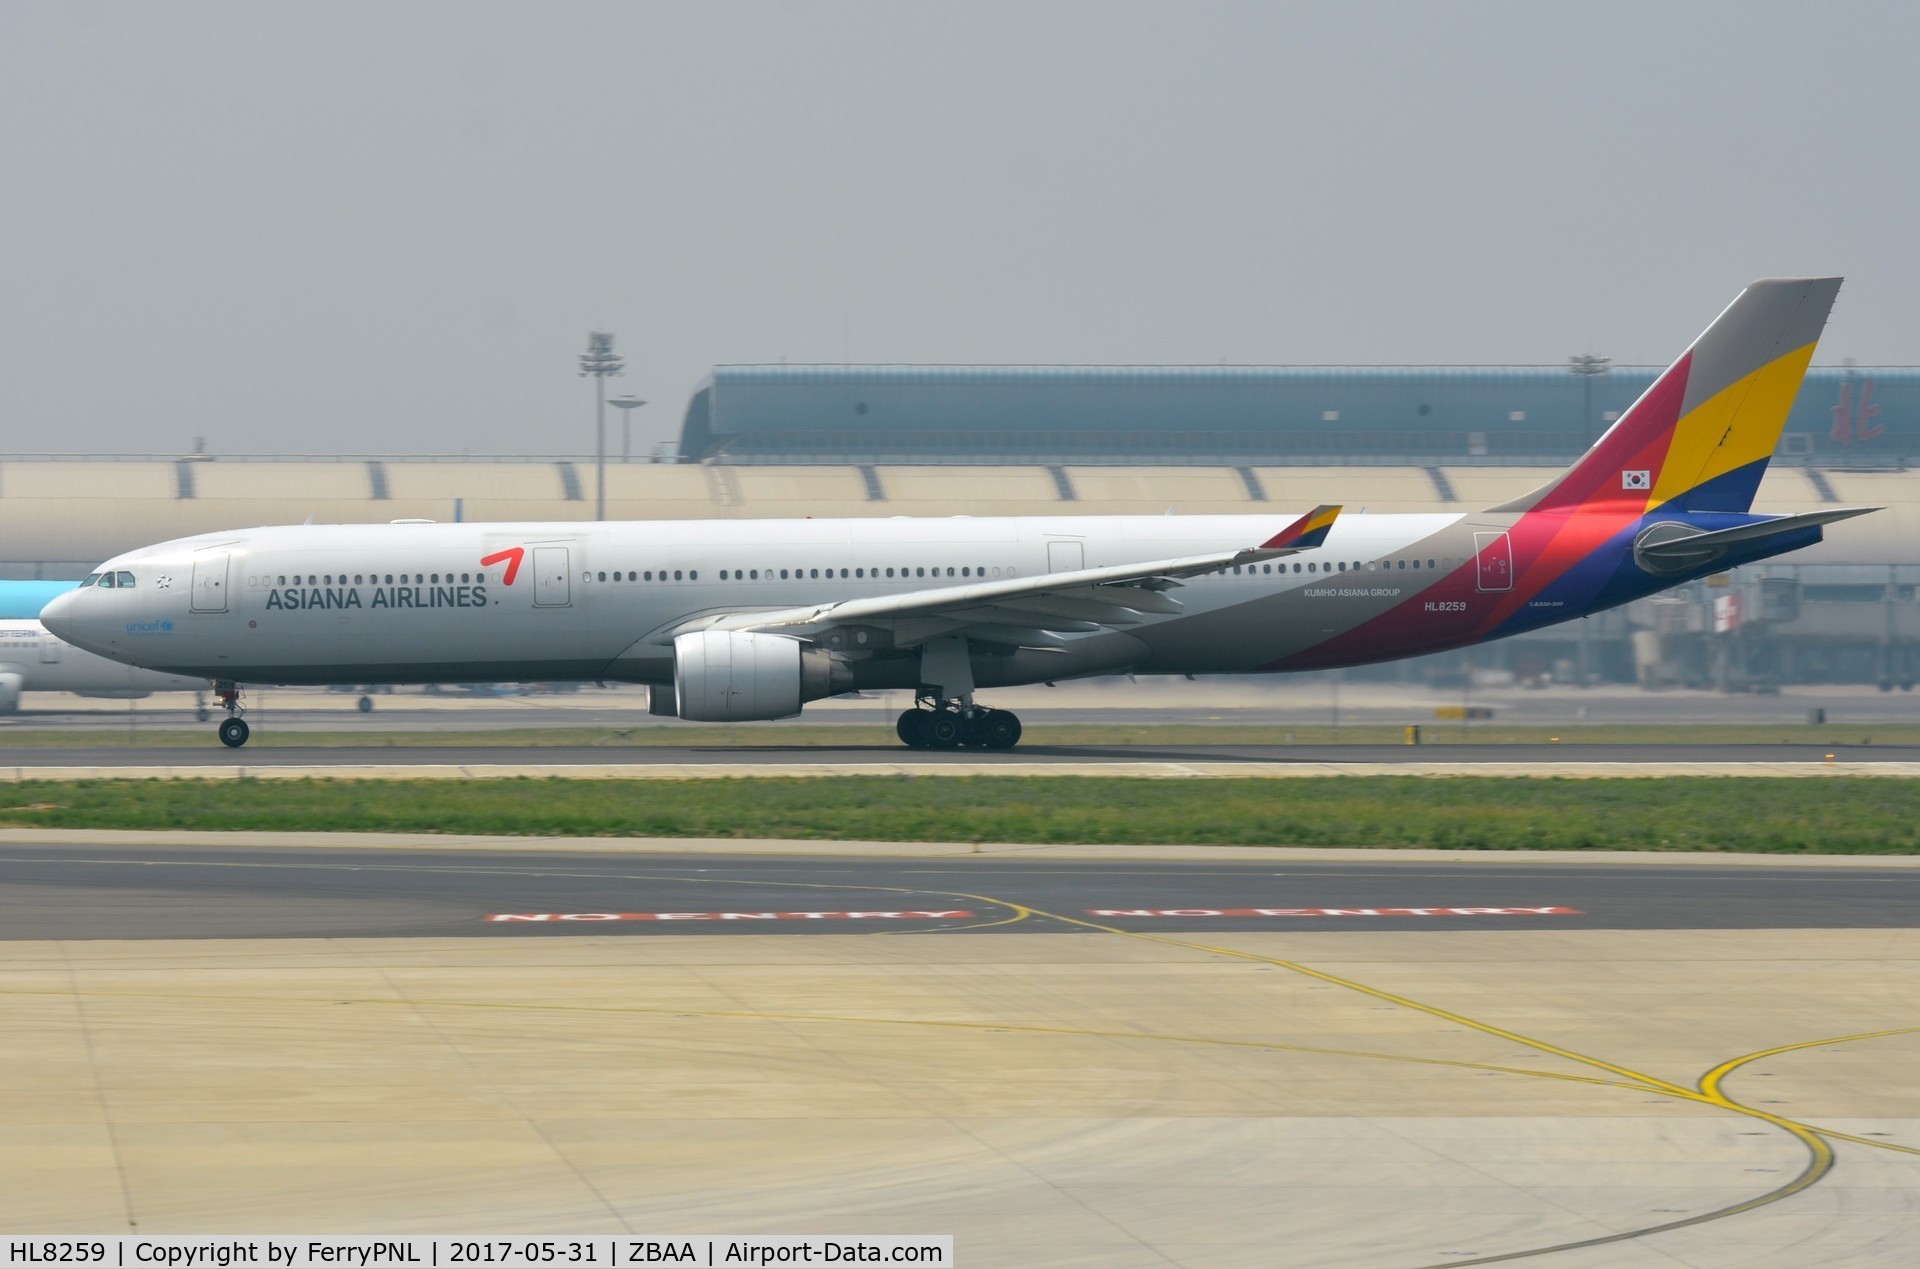 HL8259, 2012 Airbus A330-323E C/N 1340, Departure of Asiana A333